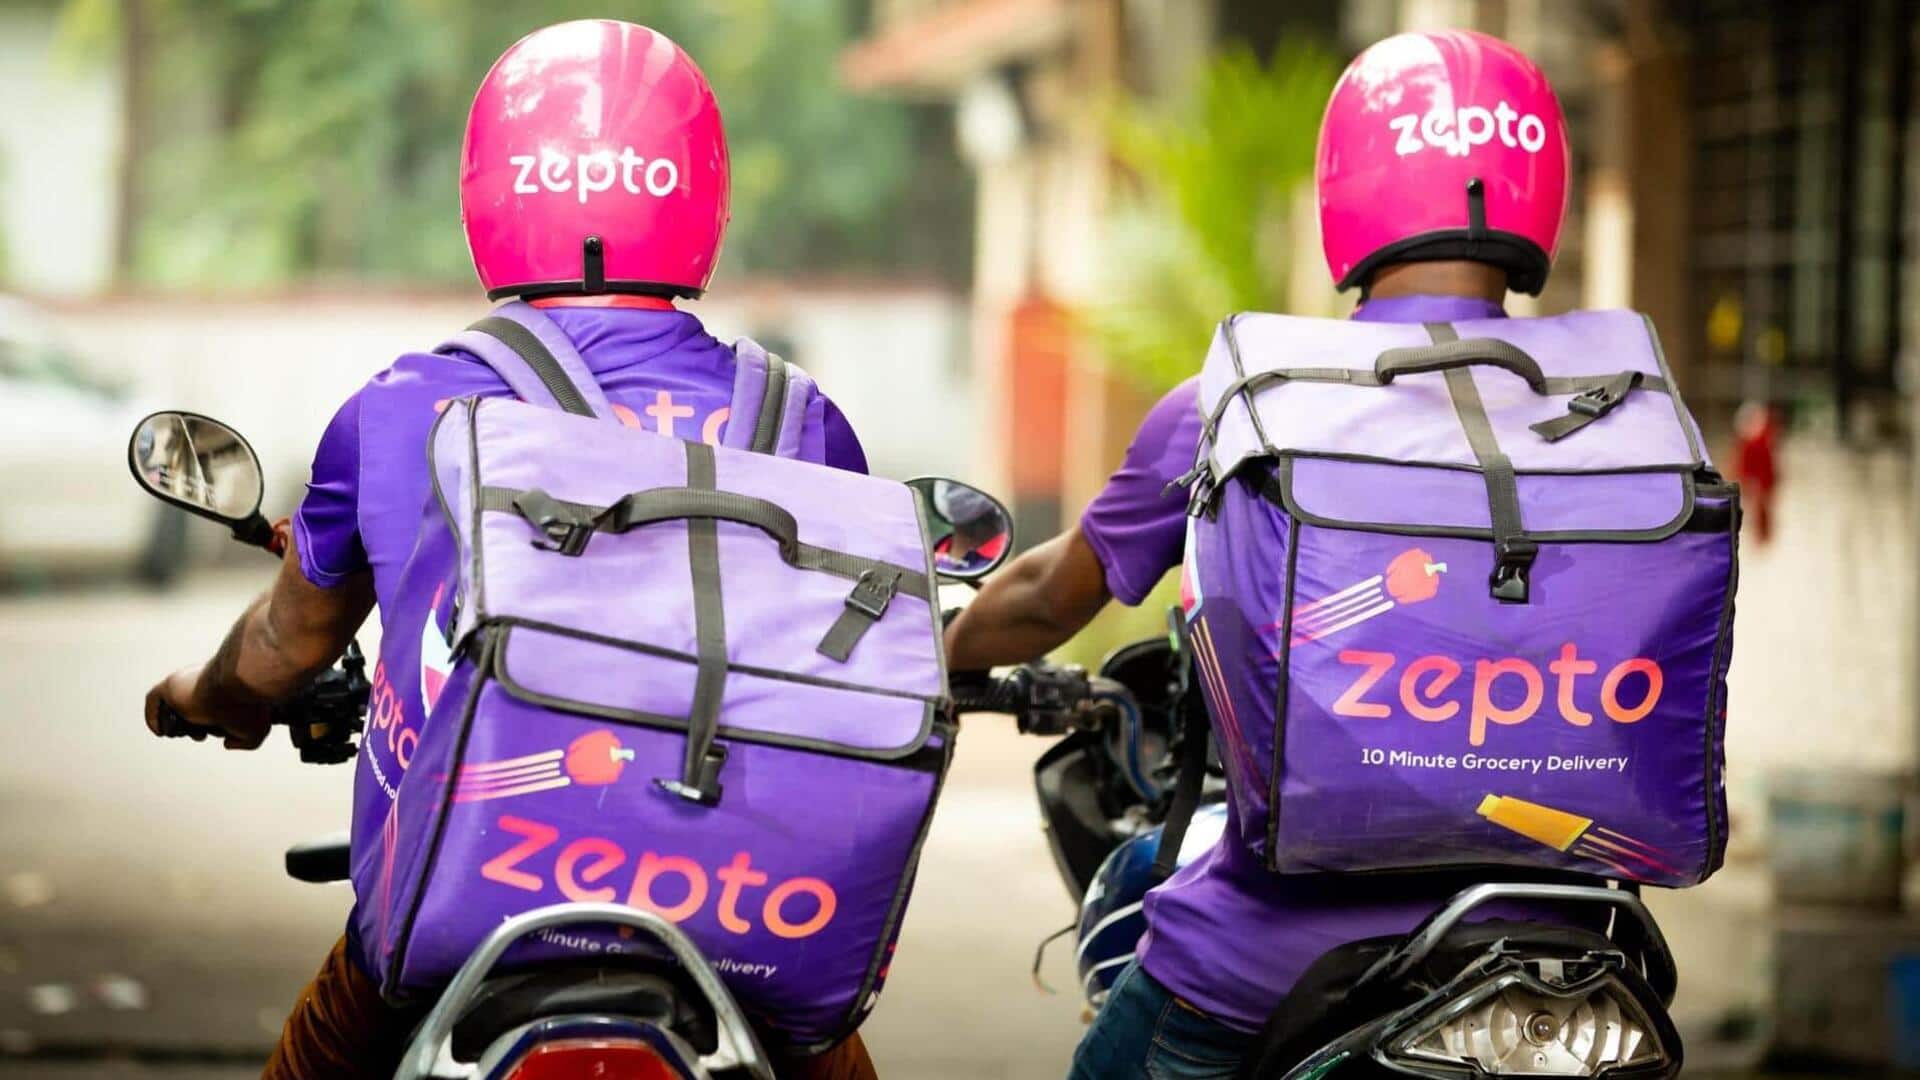 Zepto raises $665M in latest funding round at $3.6B valuation